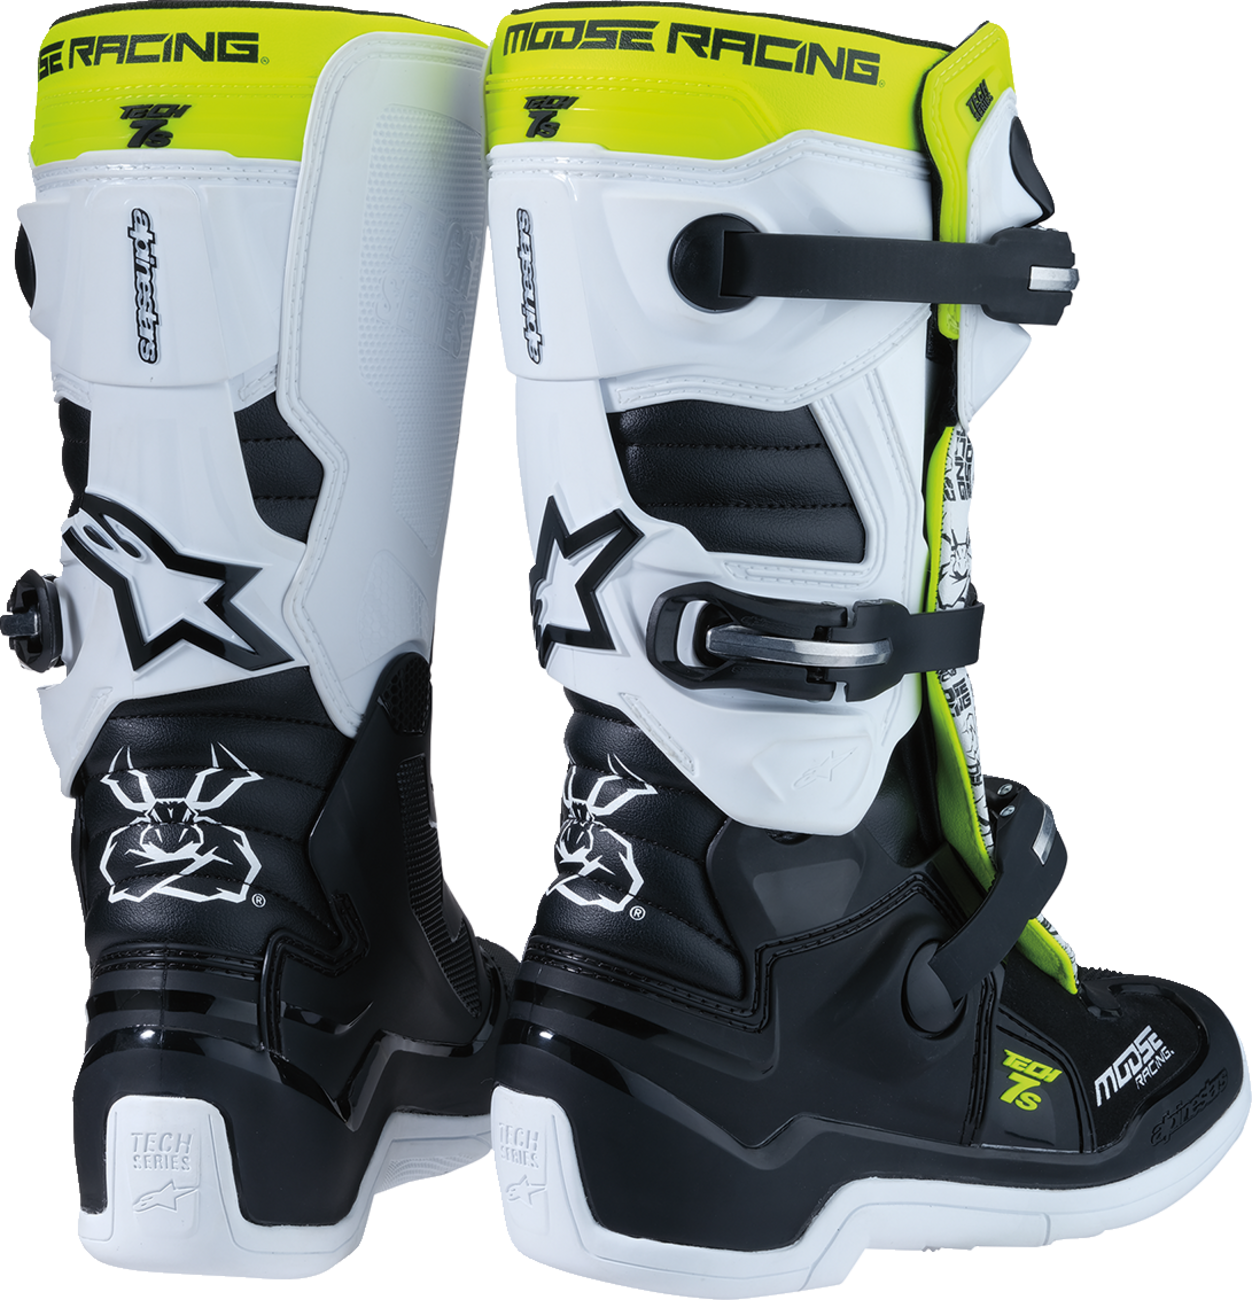 MOOSE RACING Youth Tech 7S Boots - Black/White/Yellow - US 8 0215024-125-8